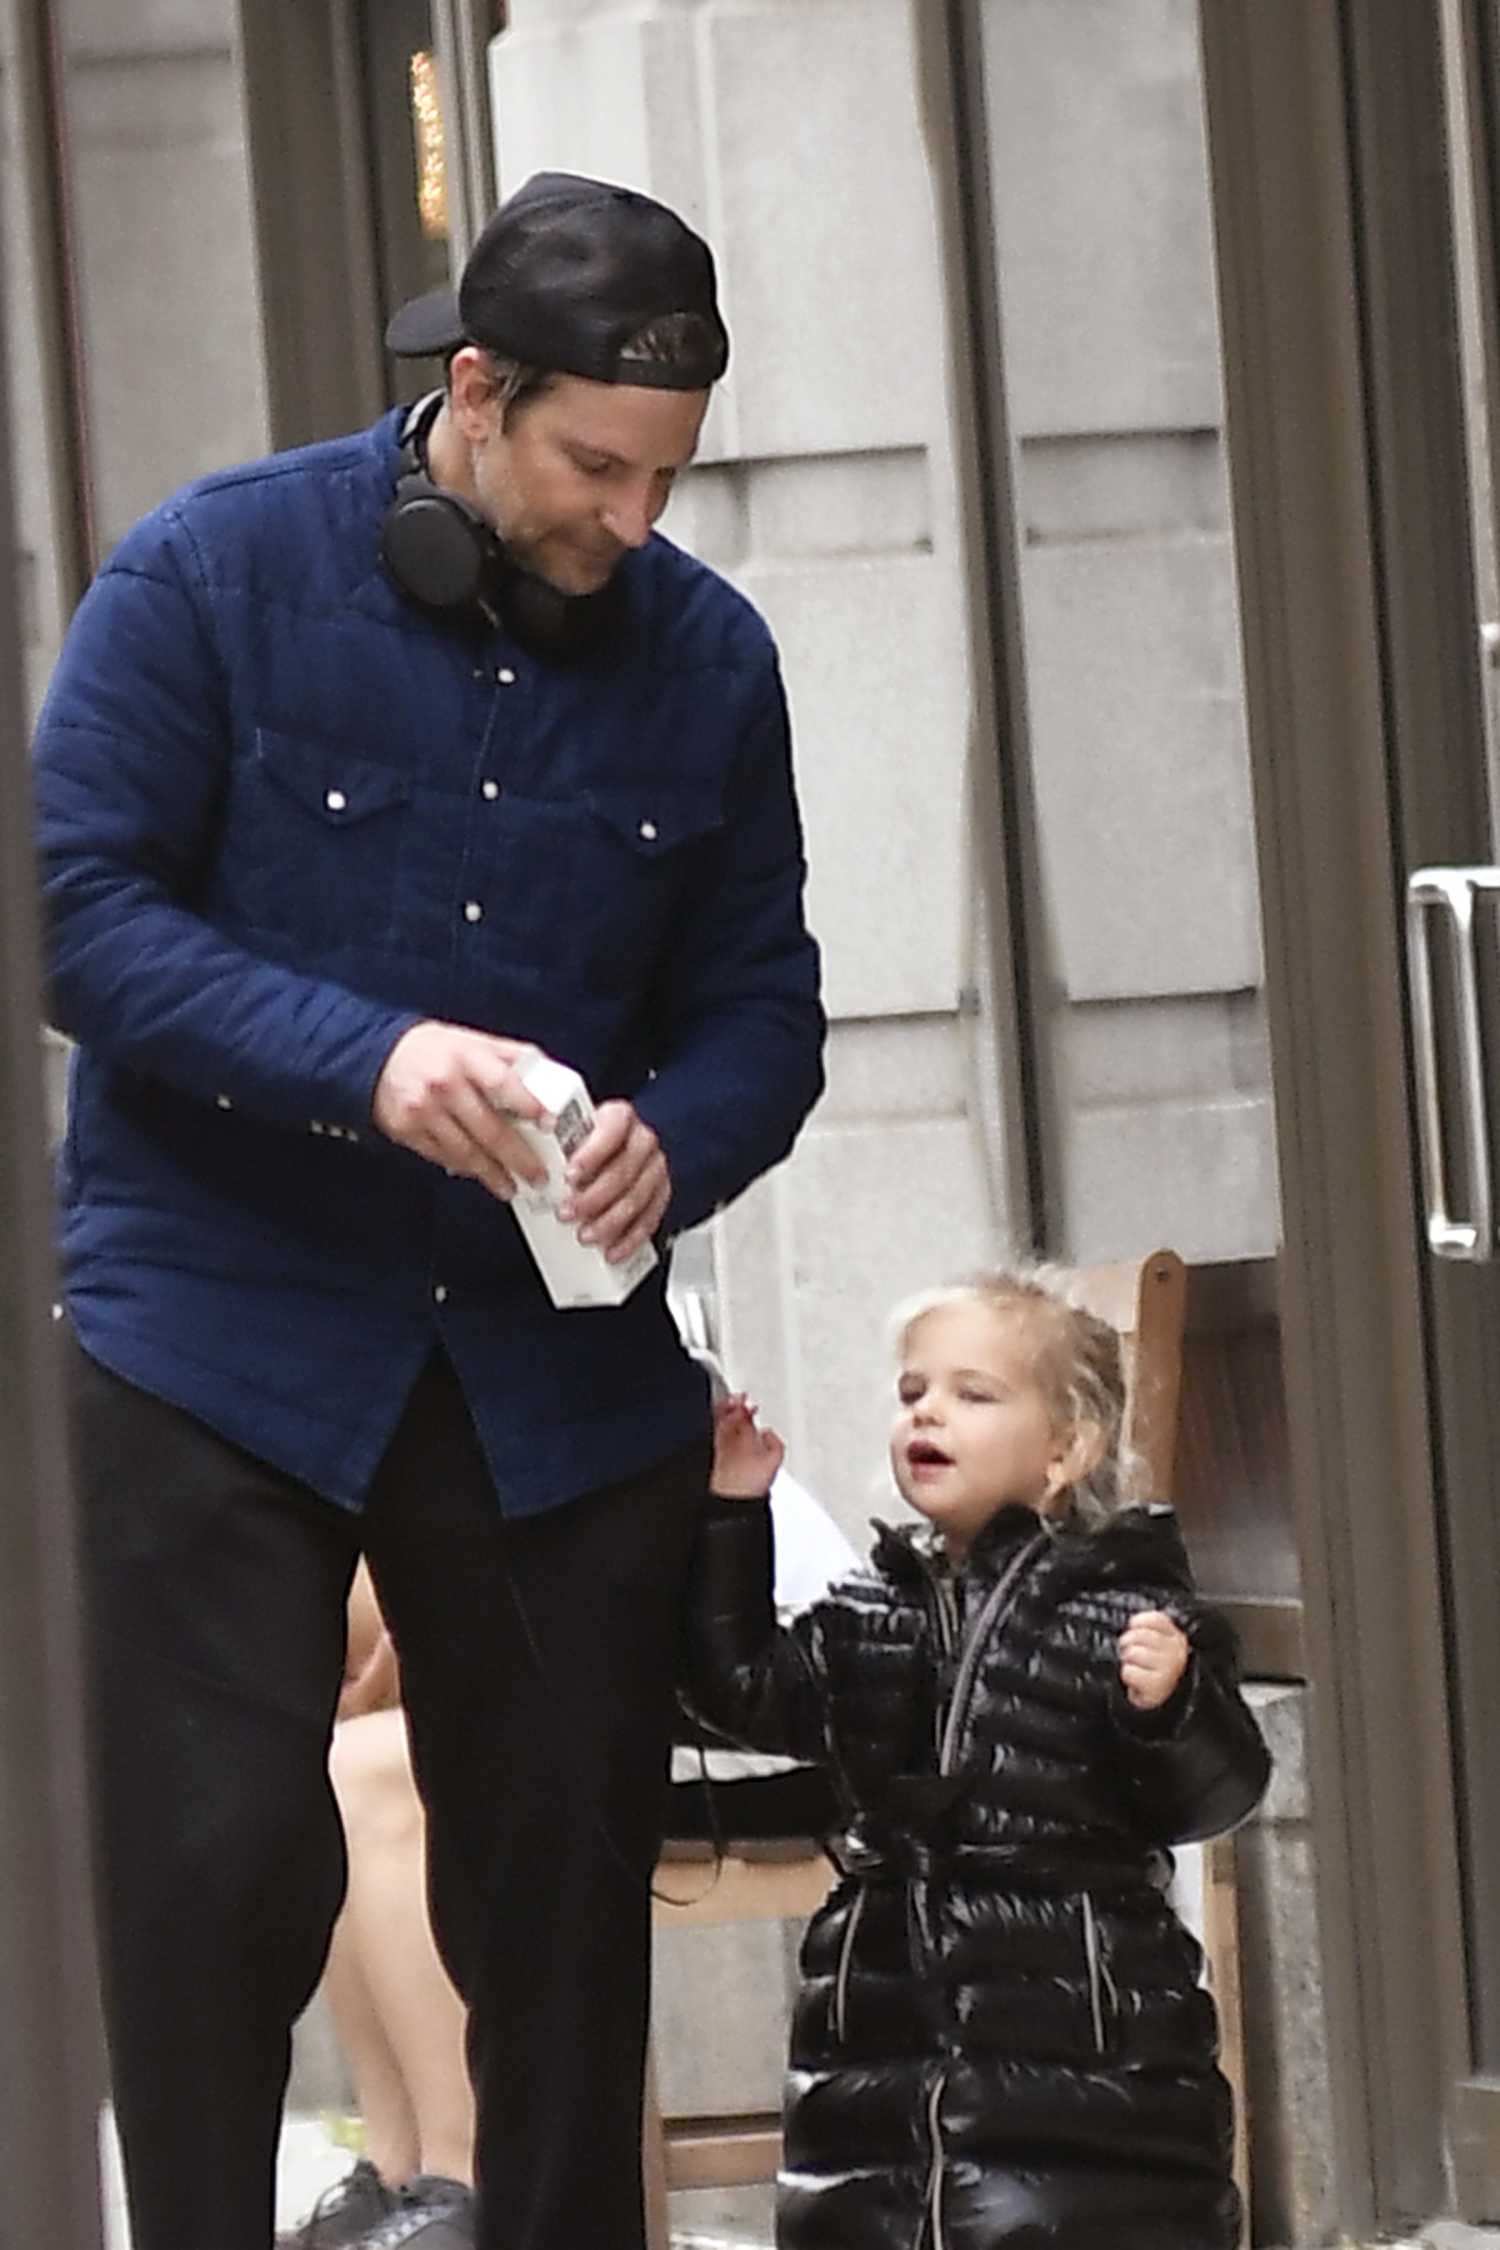 Bradley Cooper in a Black Cap Was Seen Out with His Daughter in New York – Celeb Donut